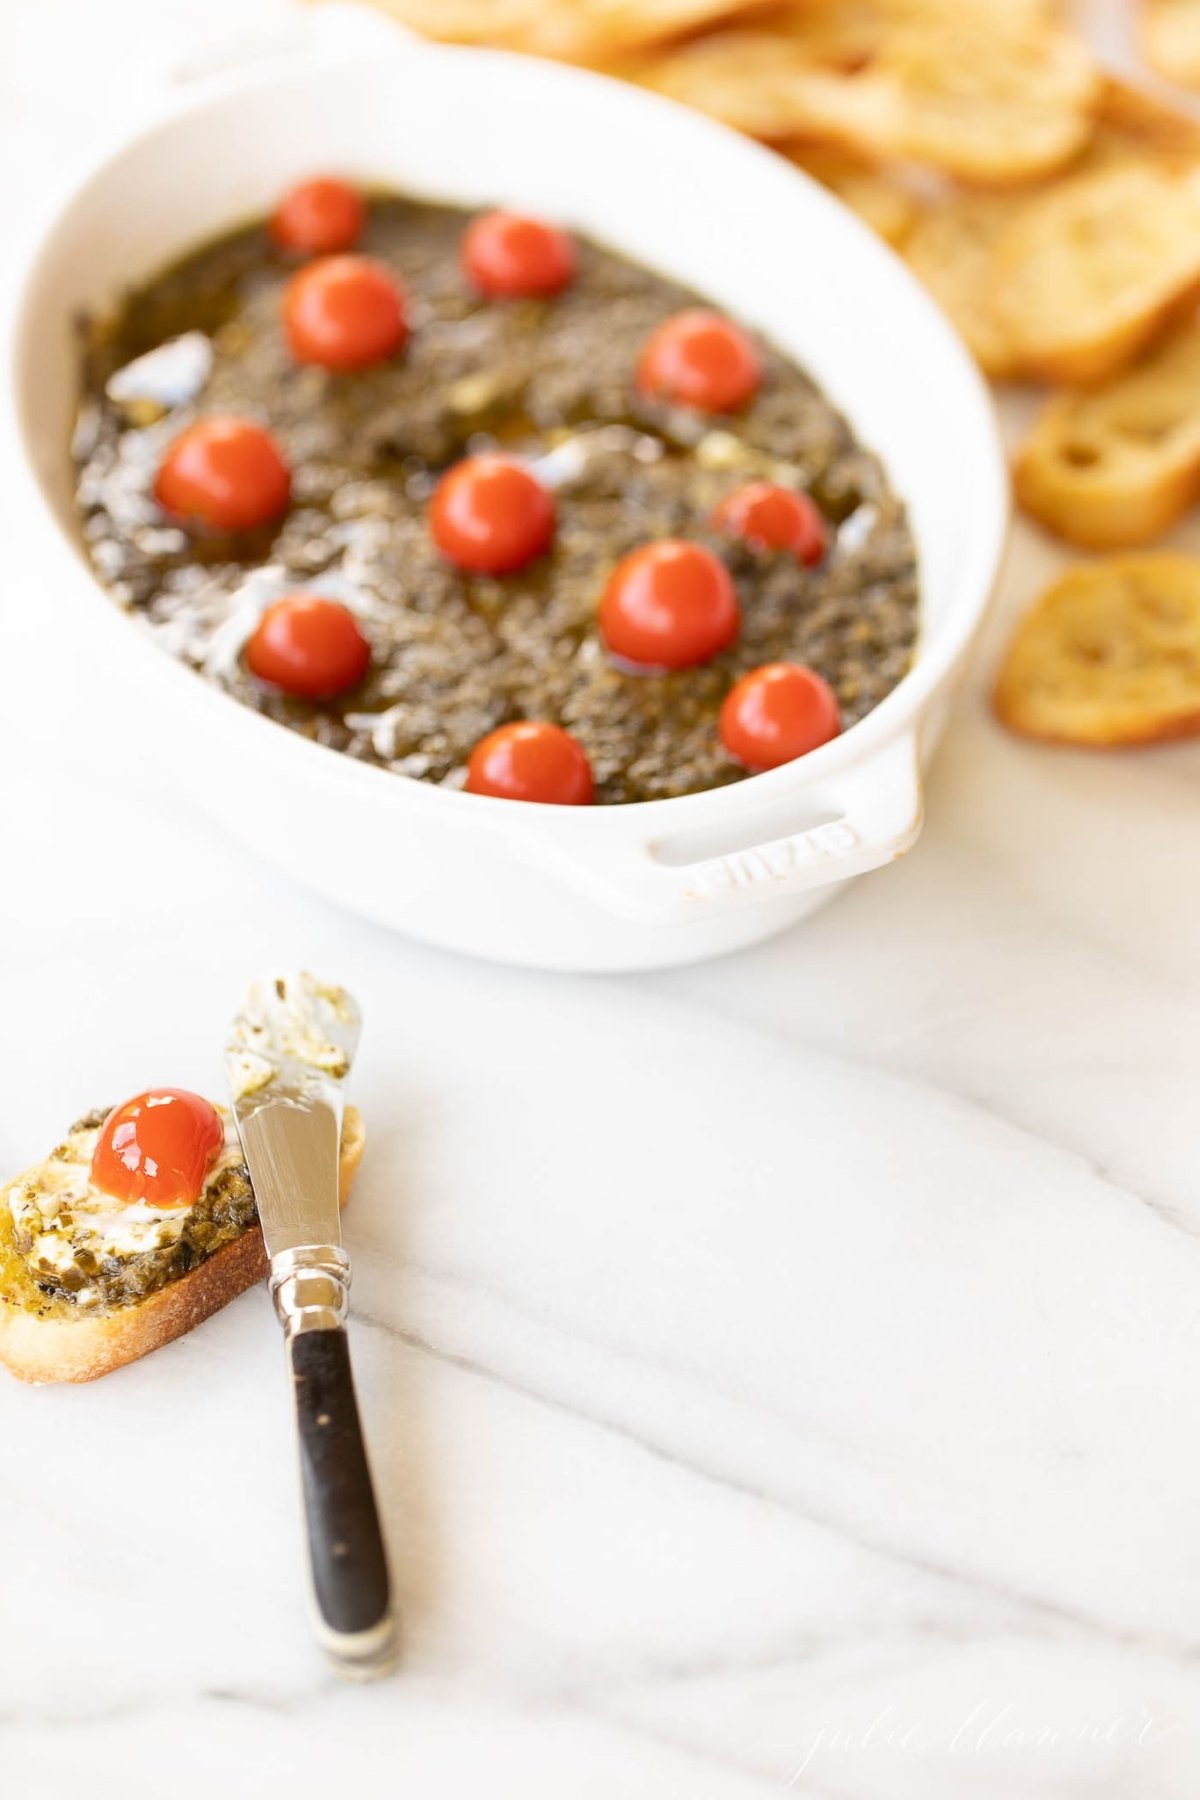 Homemade basil pesto in an oval dish with crostini slices to the side.